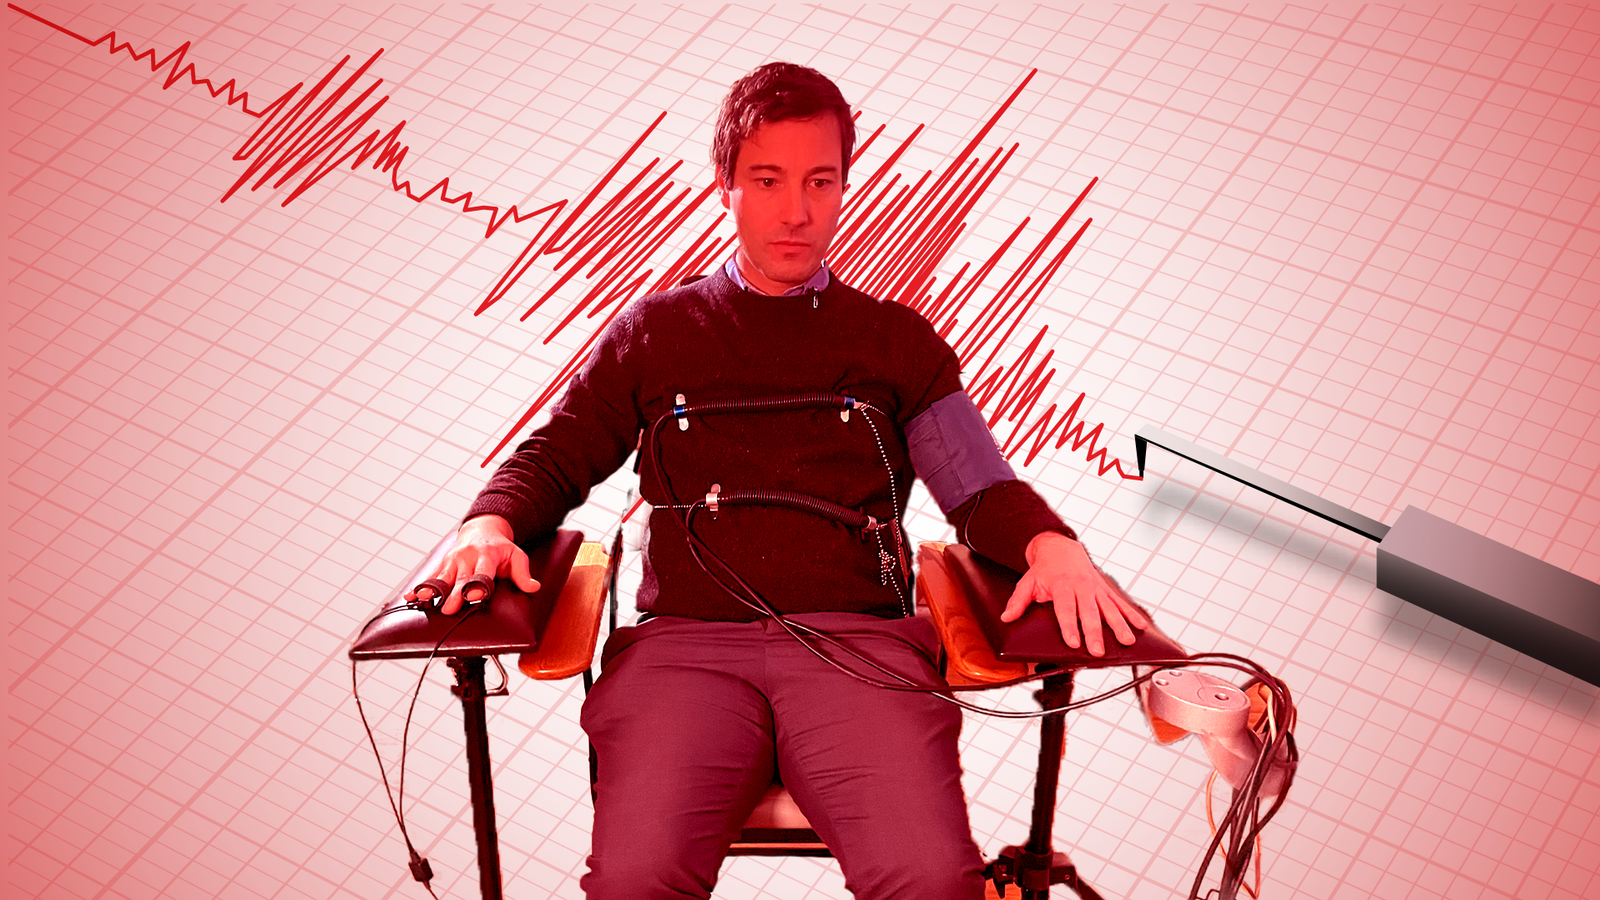 Can you beat a lie detector? UK police increasingly using polygraph tests - here's how people try to cheat